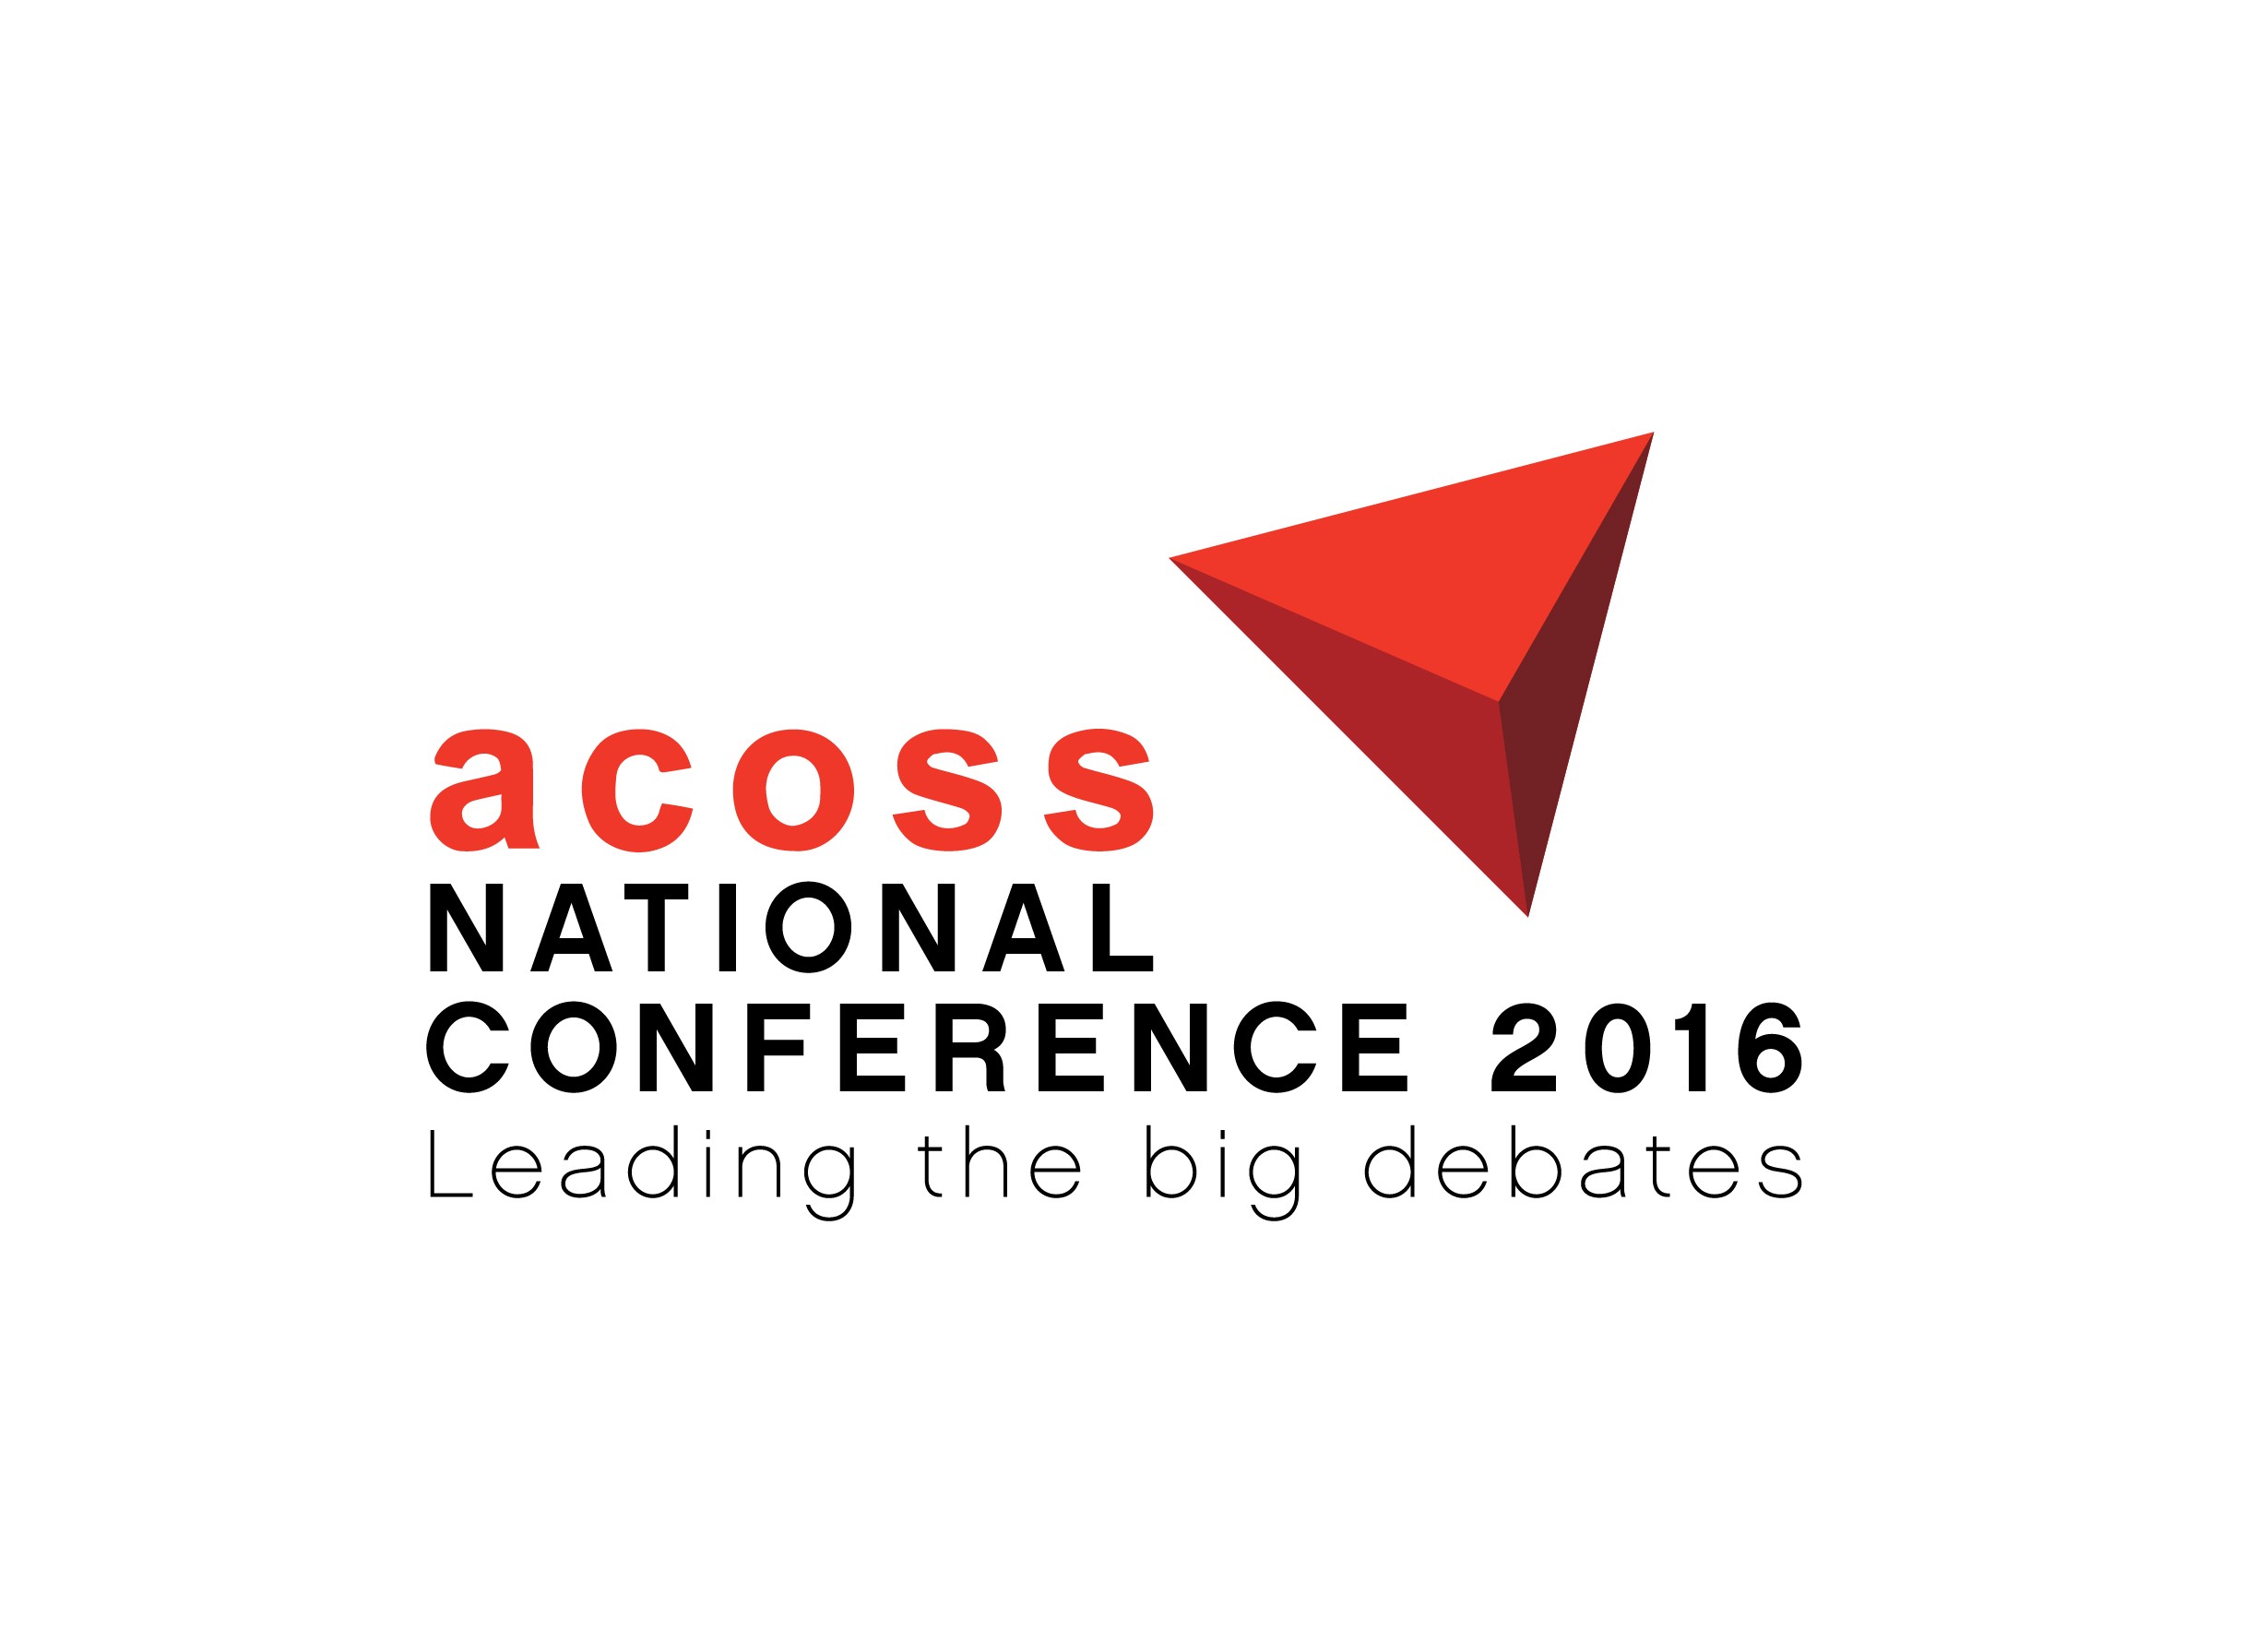 ACOSS National Conference